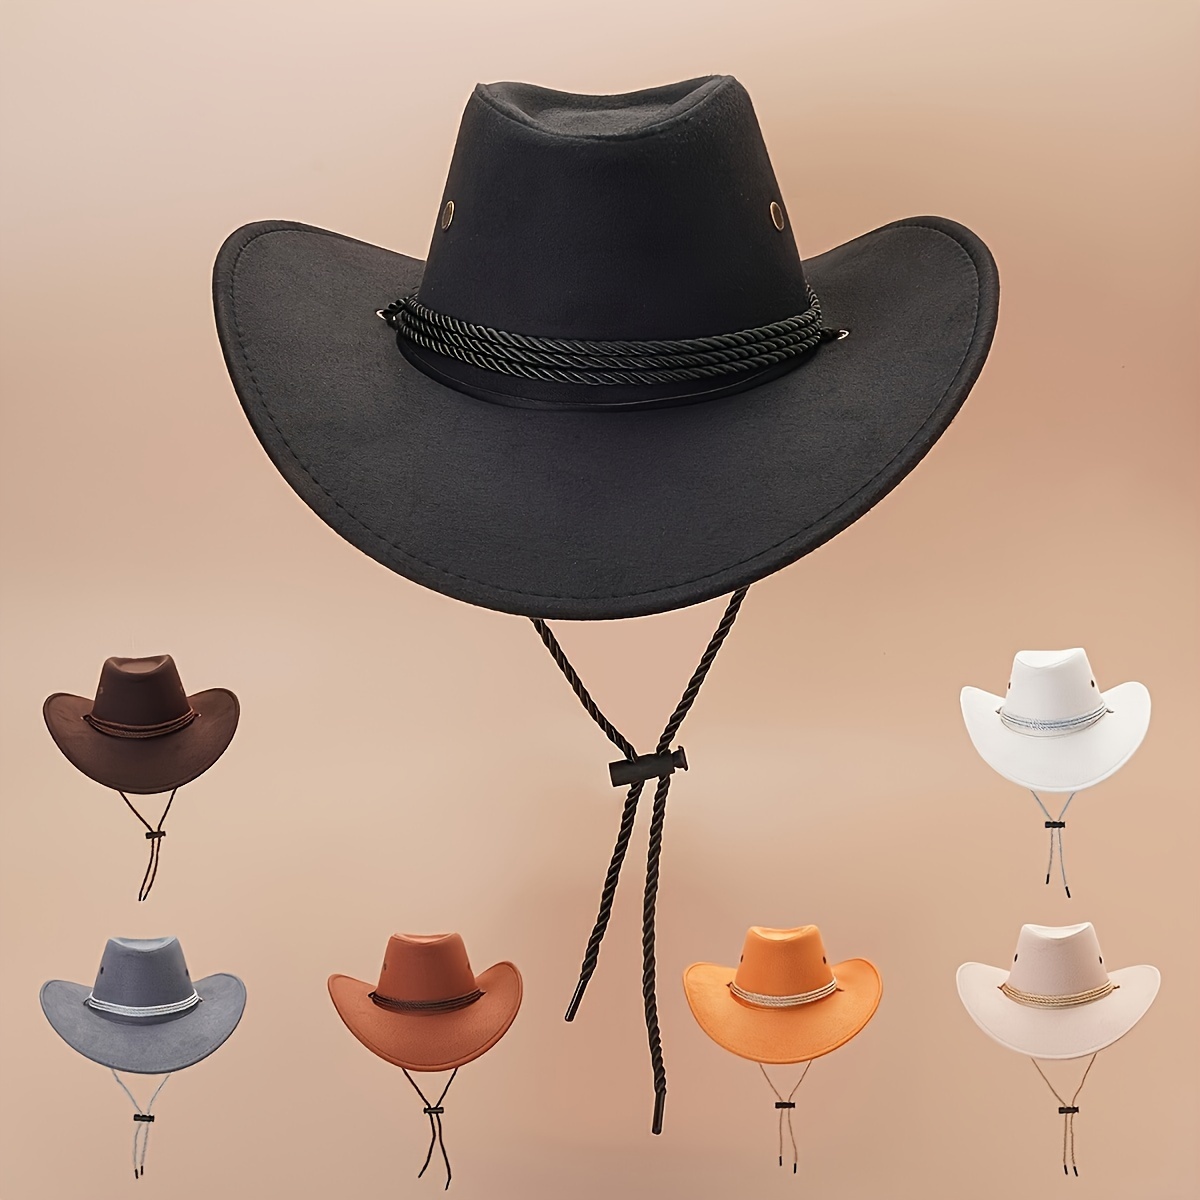 VERBIER Classic Men Brim Straw Hats Gangster Style Cowboy Hat for